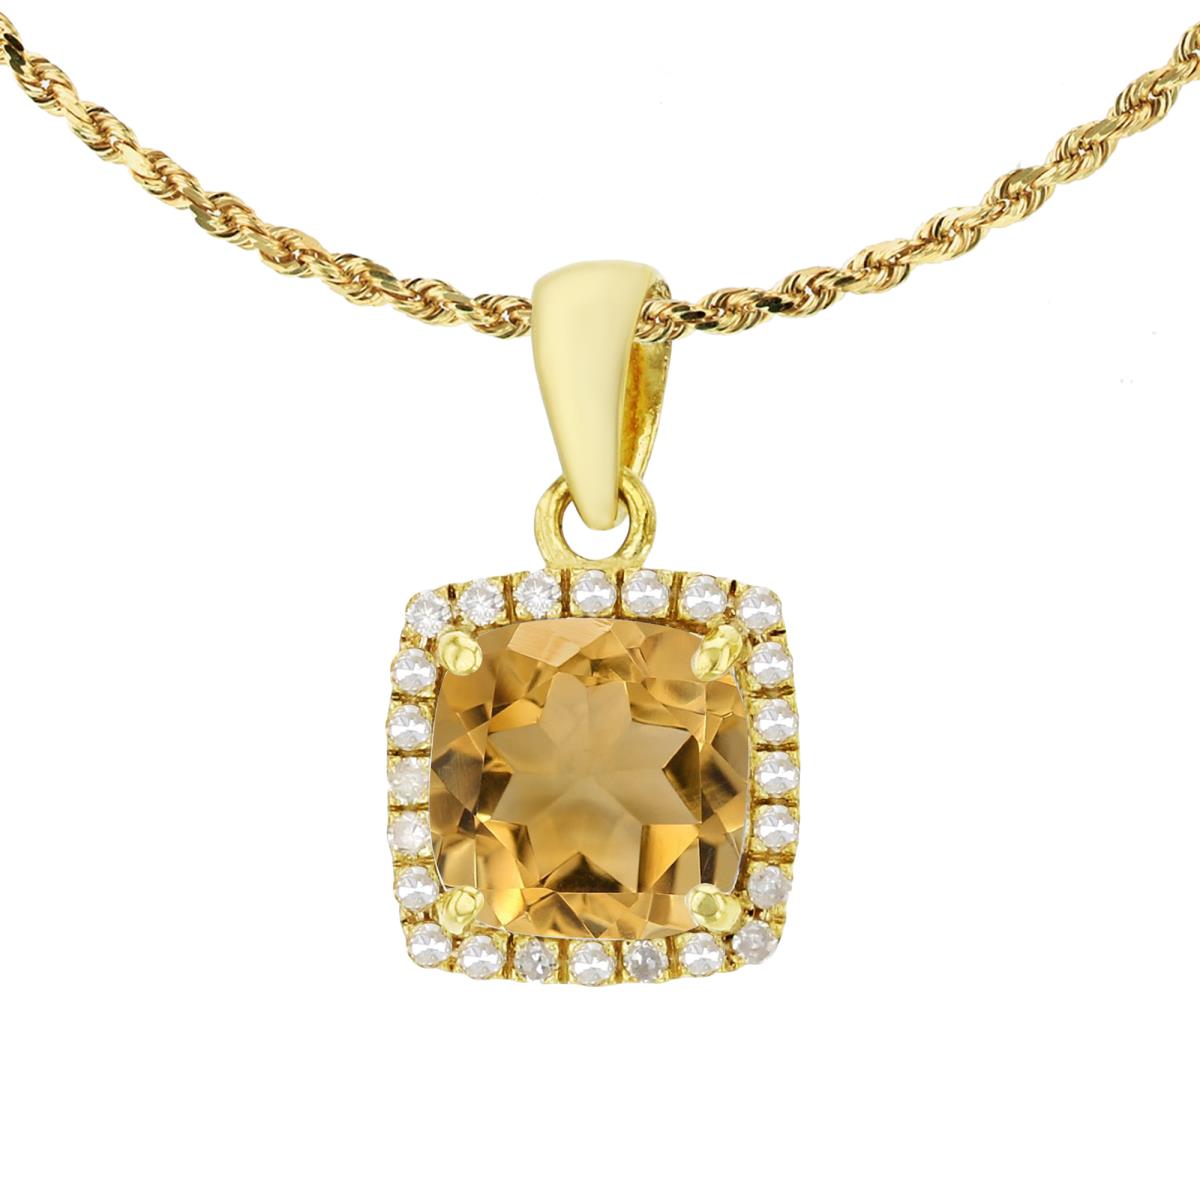 10K Yellow Gold 7mm Cushion Citrine & 0.12 CTTW Diamond Halo 18" Rope Chain Necklace